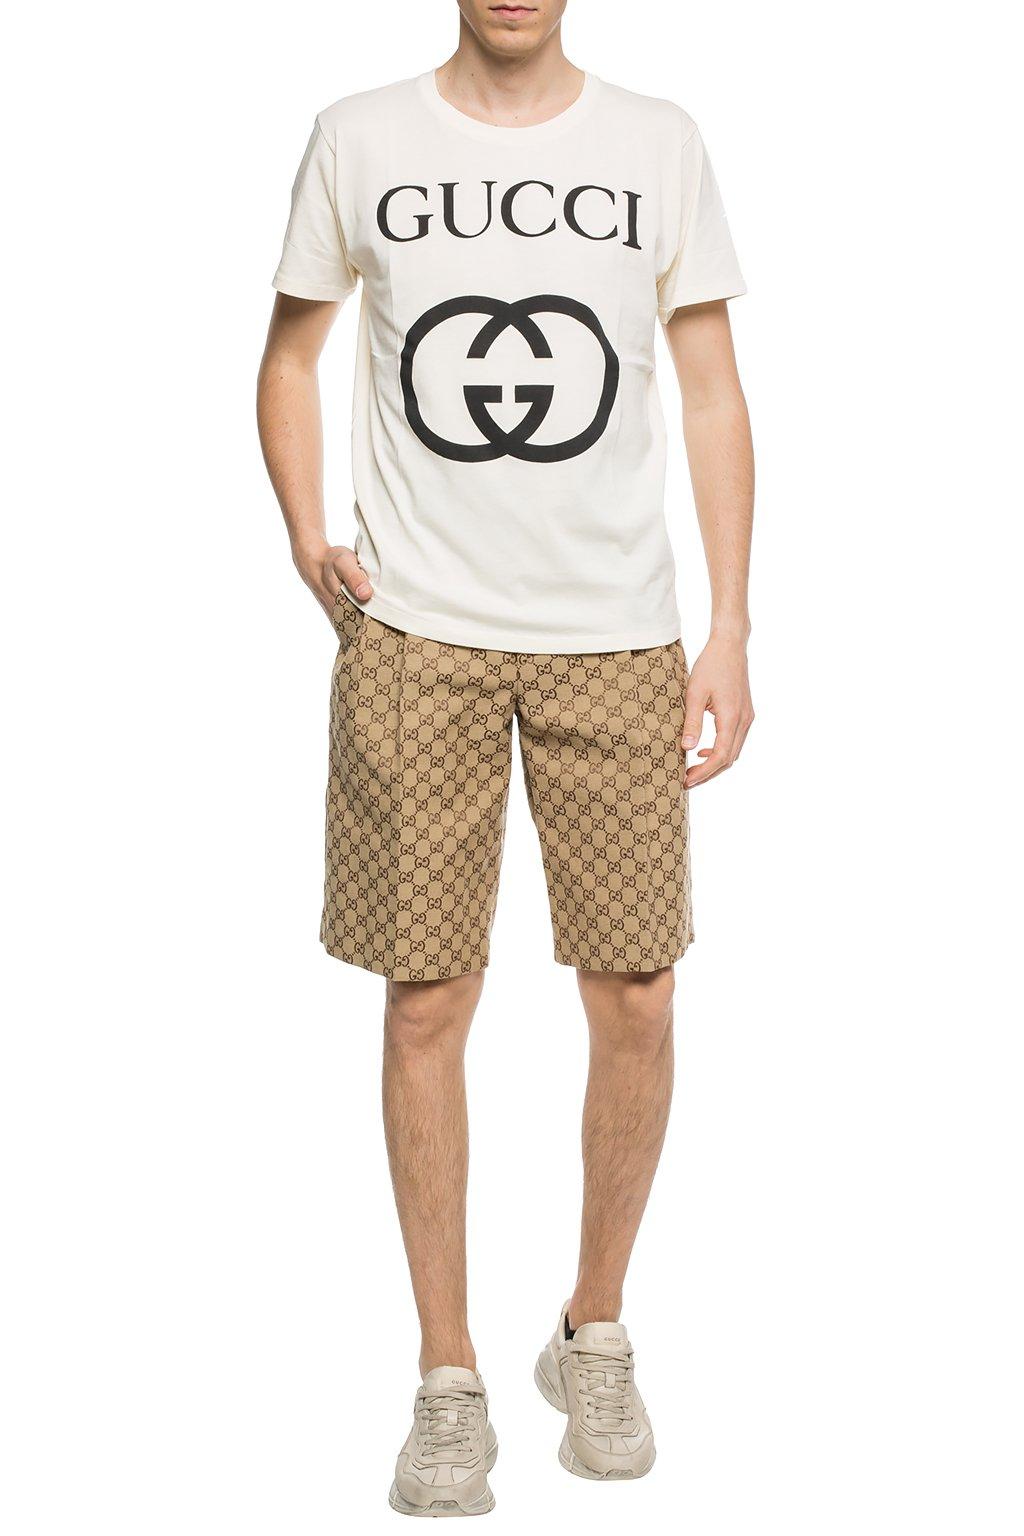 Gucci Gg Canvas Shorts in Brown (Natural) for Men - Lyst